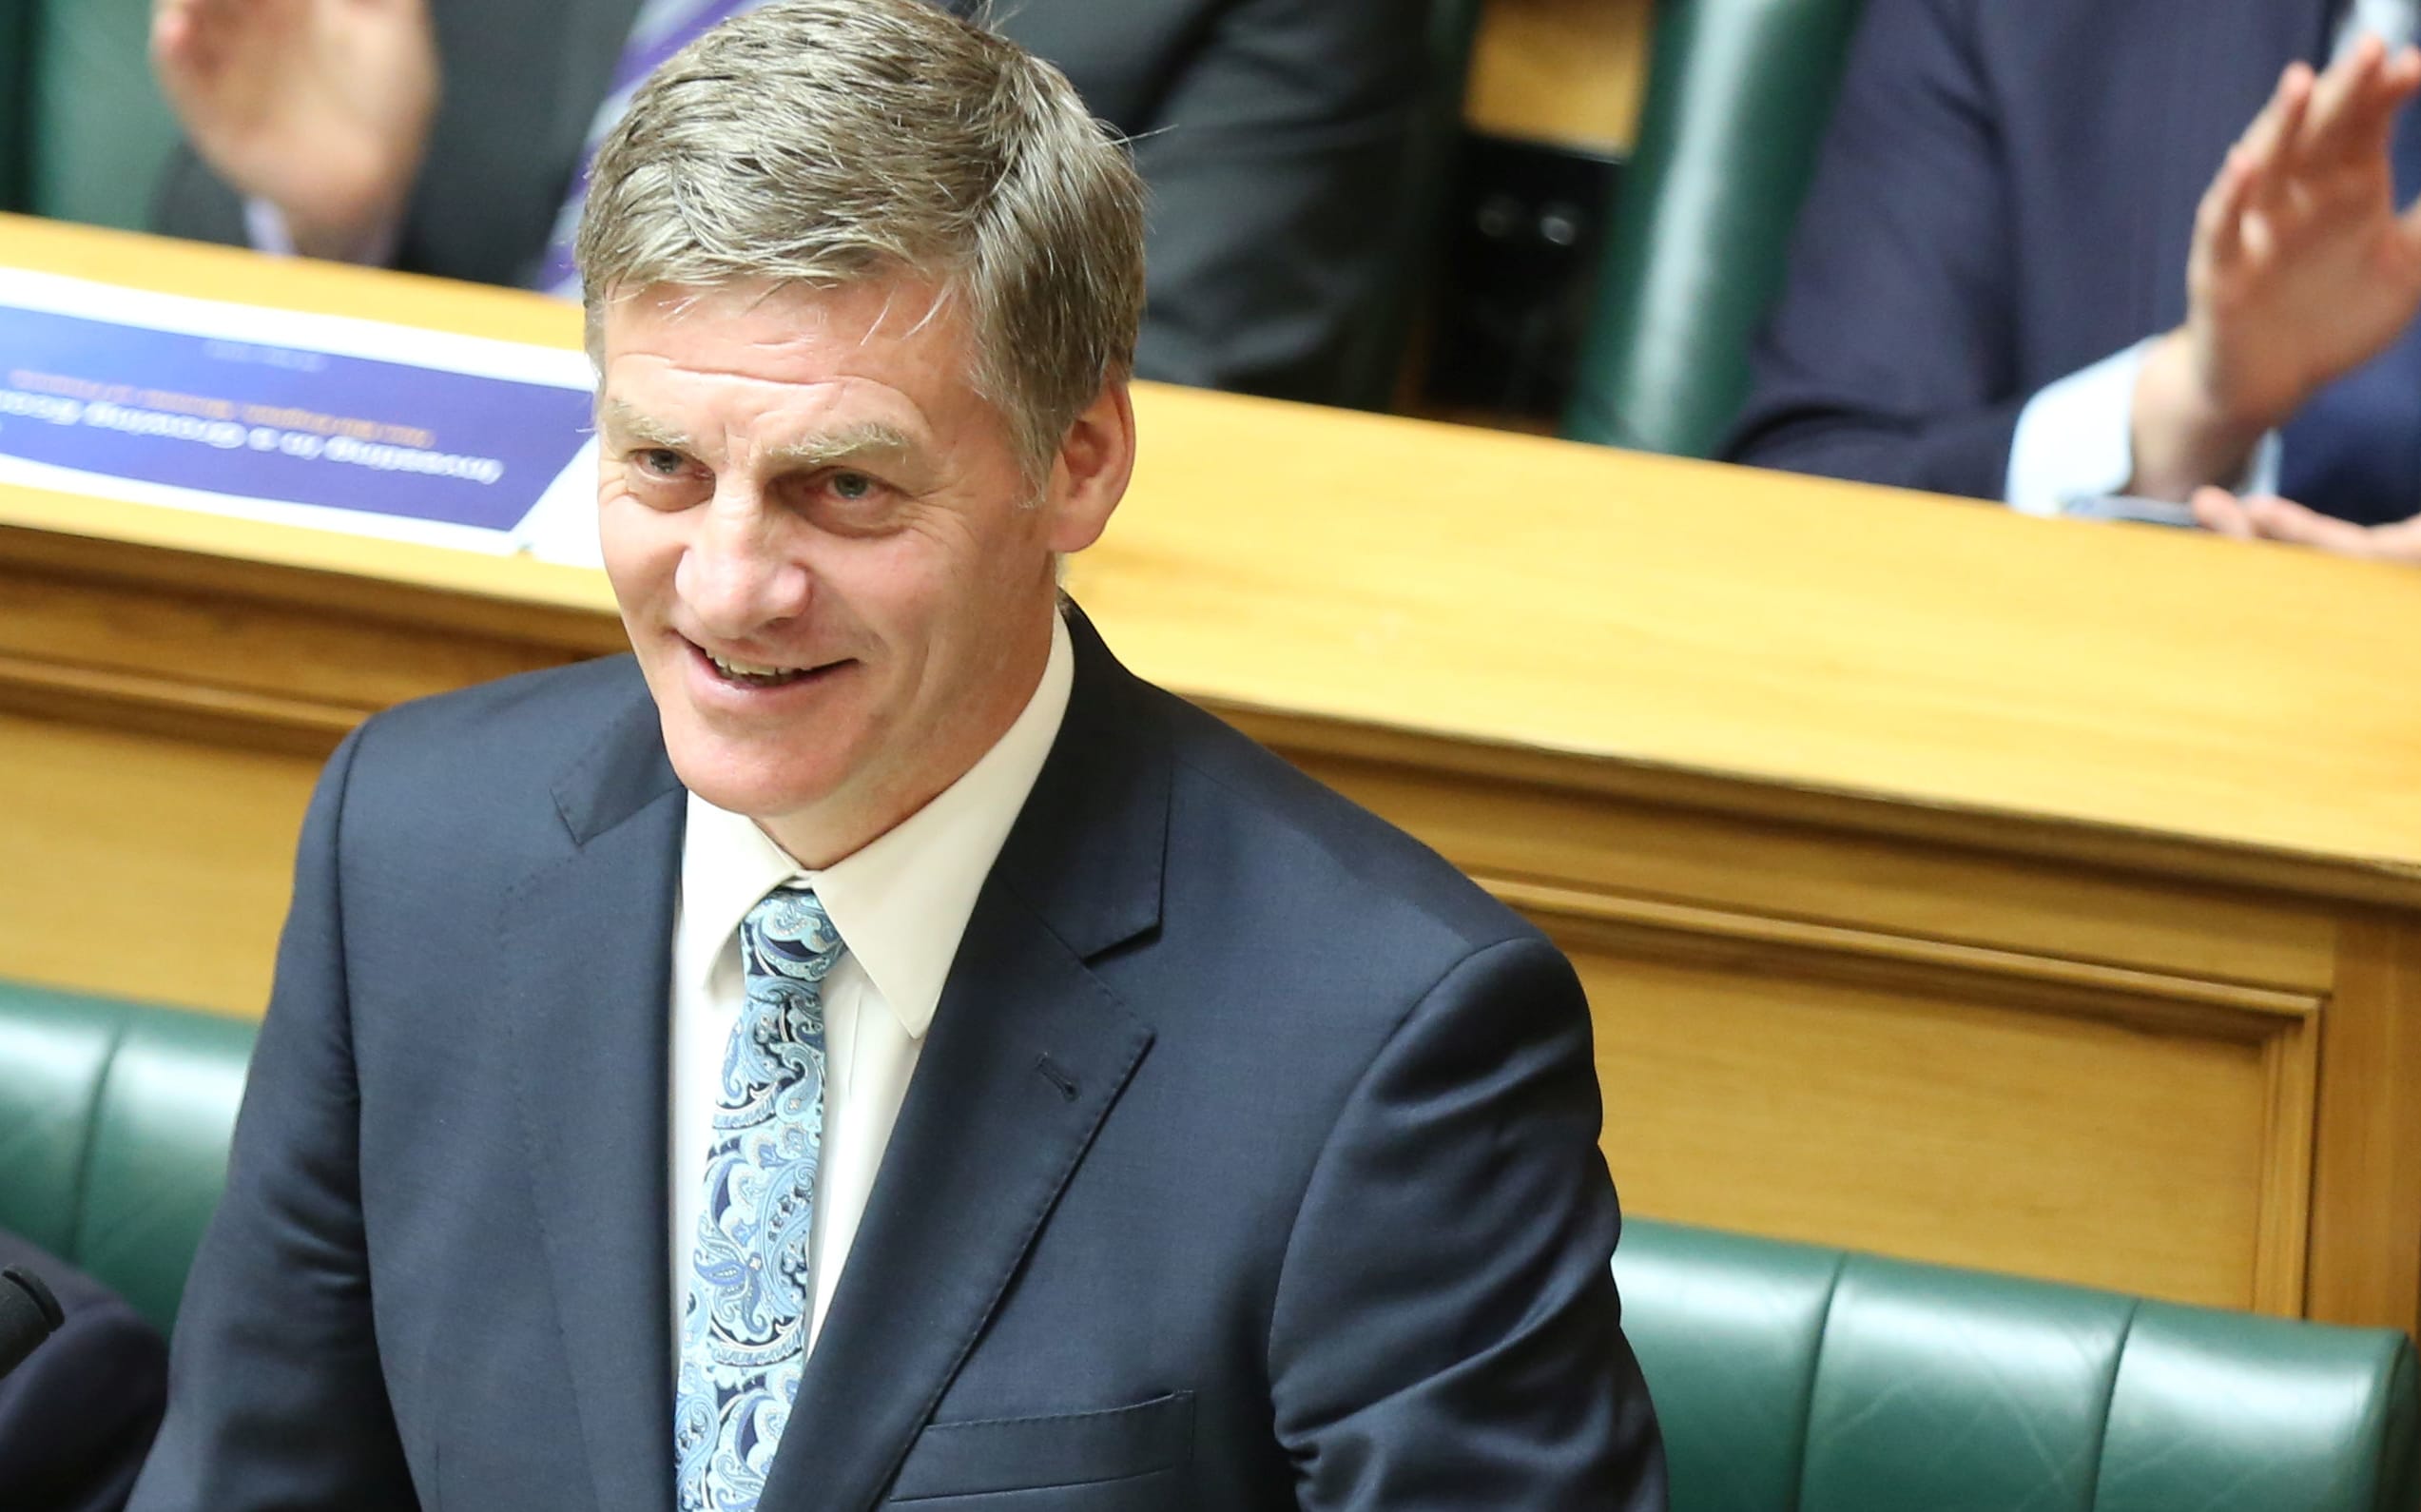 Finance Minister Bill English delivers his Budget 2016 speech to Parliament.